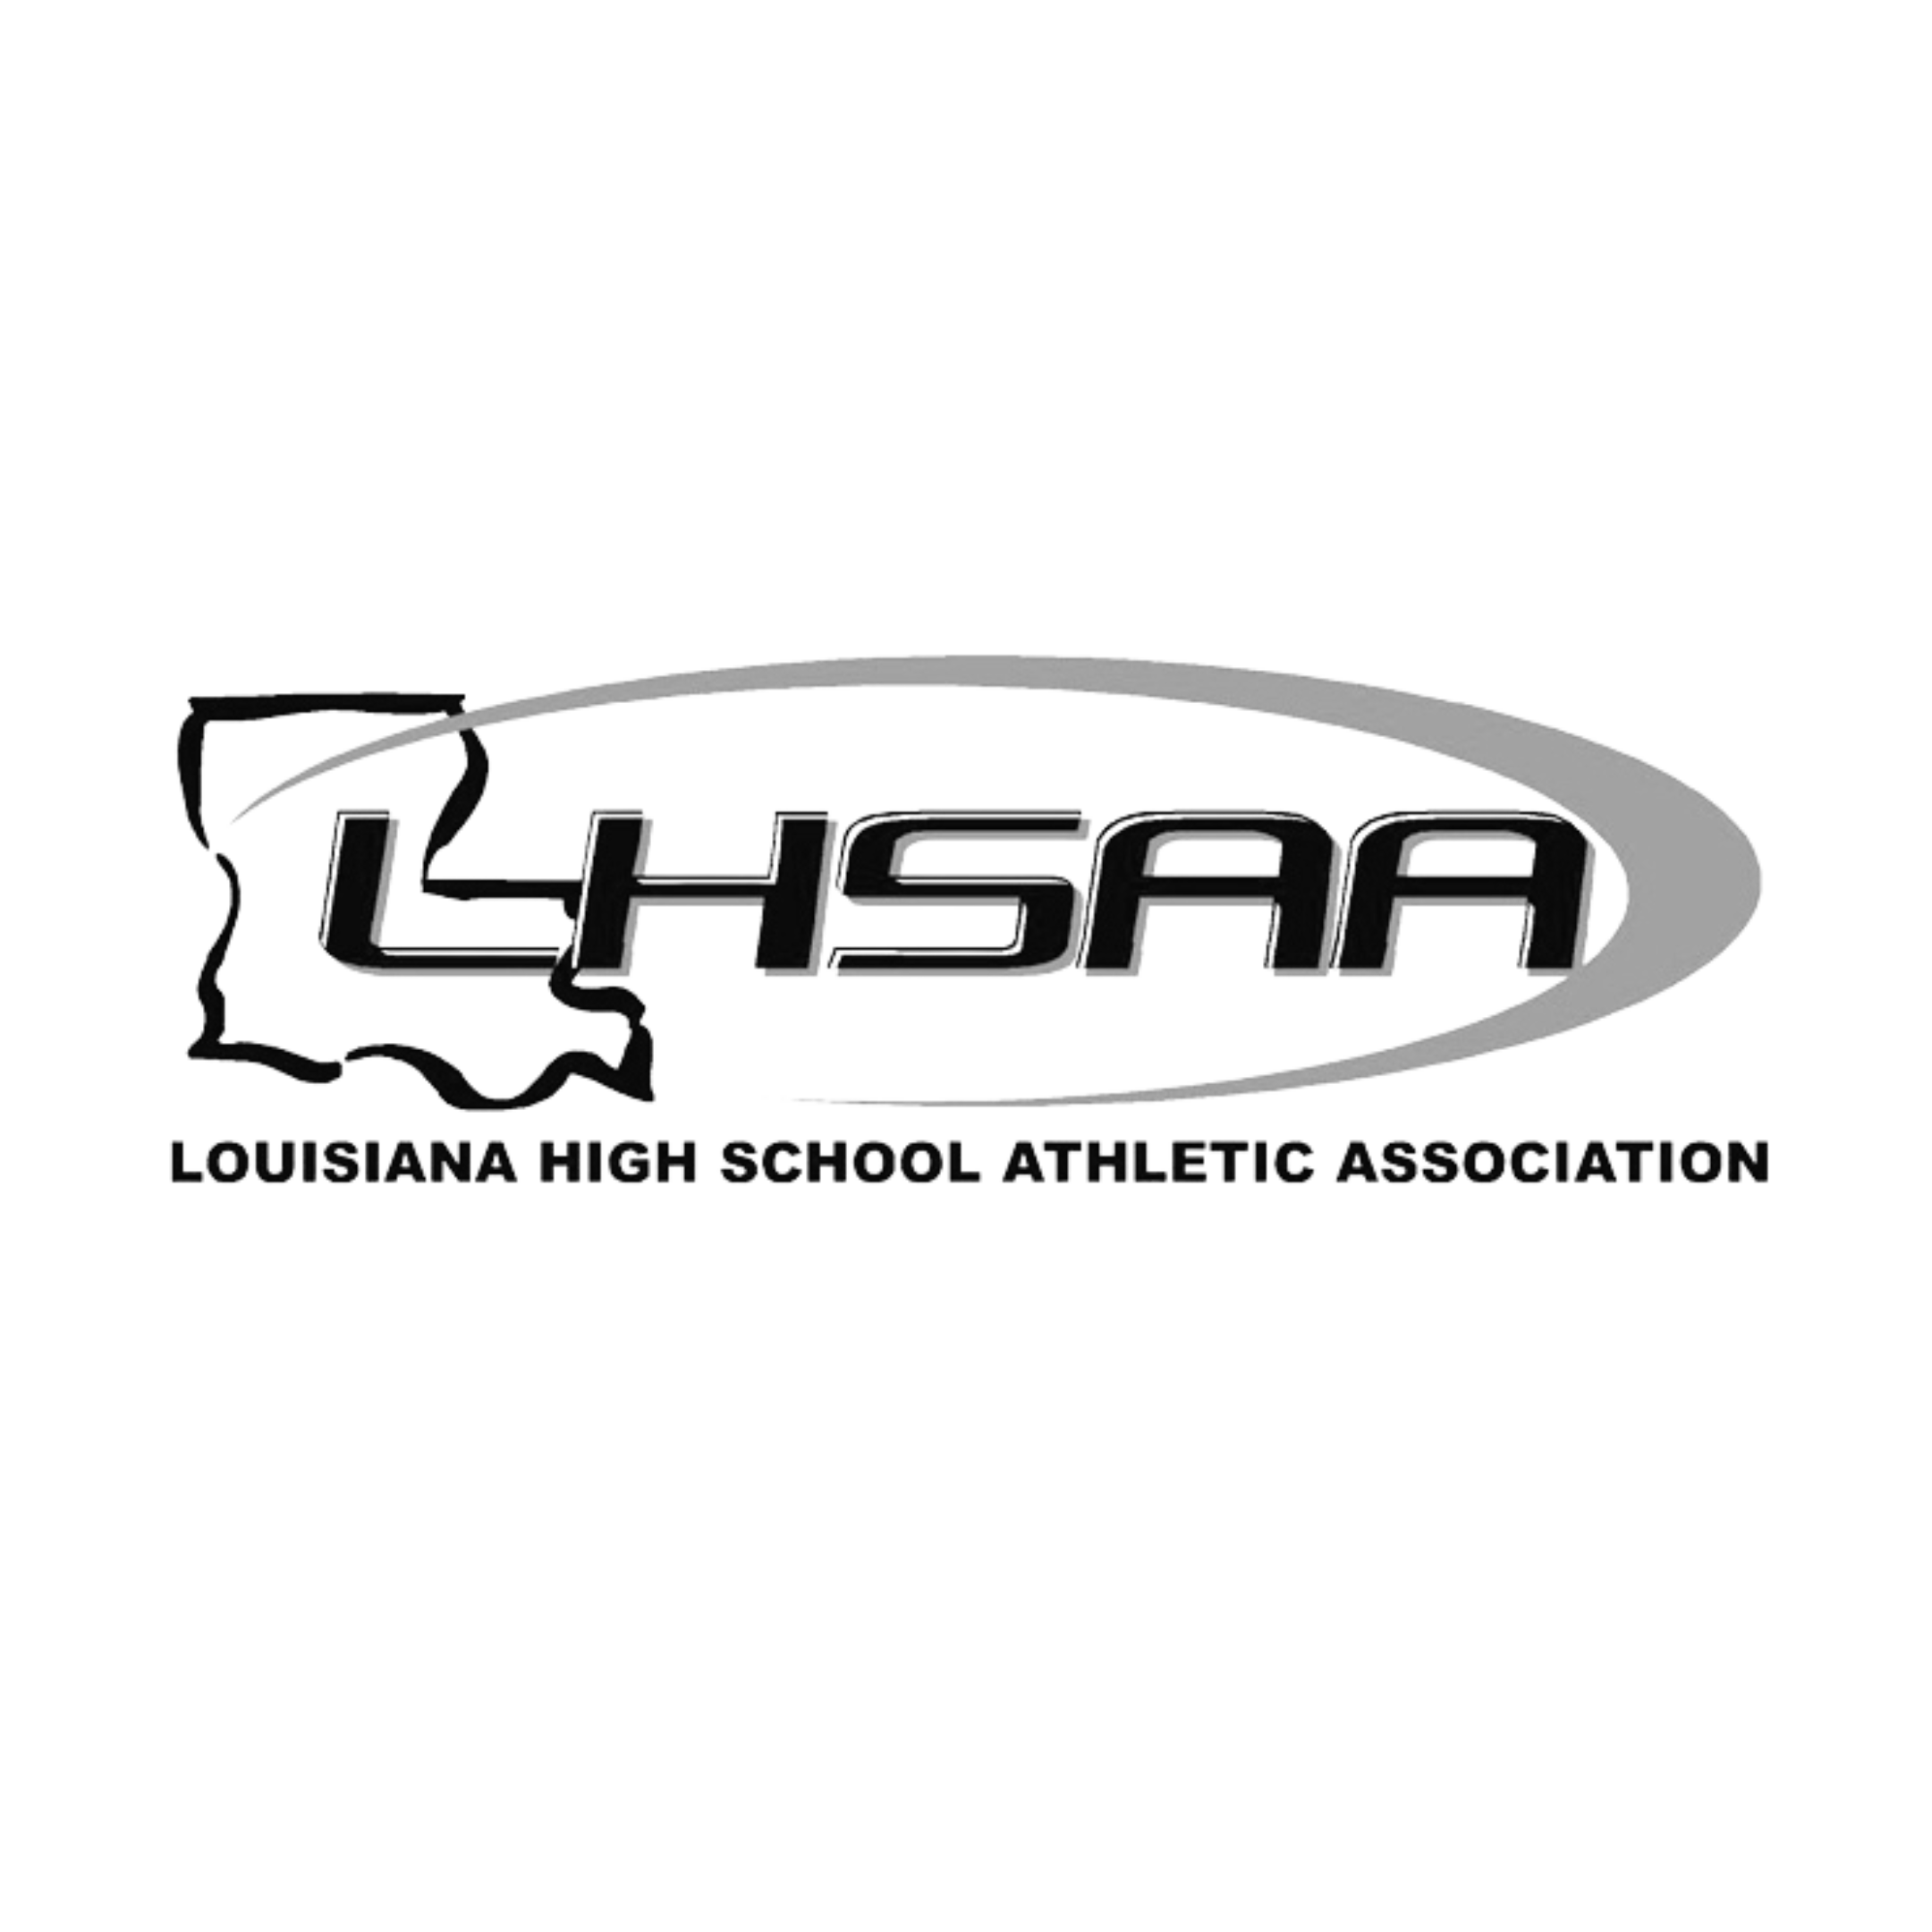 LHSAA allows student-athletes to receive NIL benefits; Partners with Eccker Sports to provide required NIL educational services throughout the state